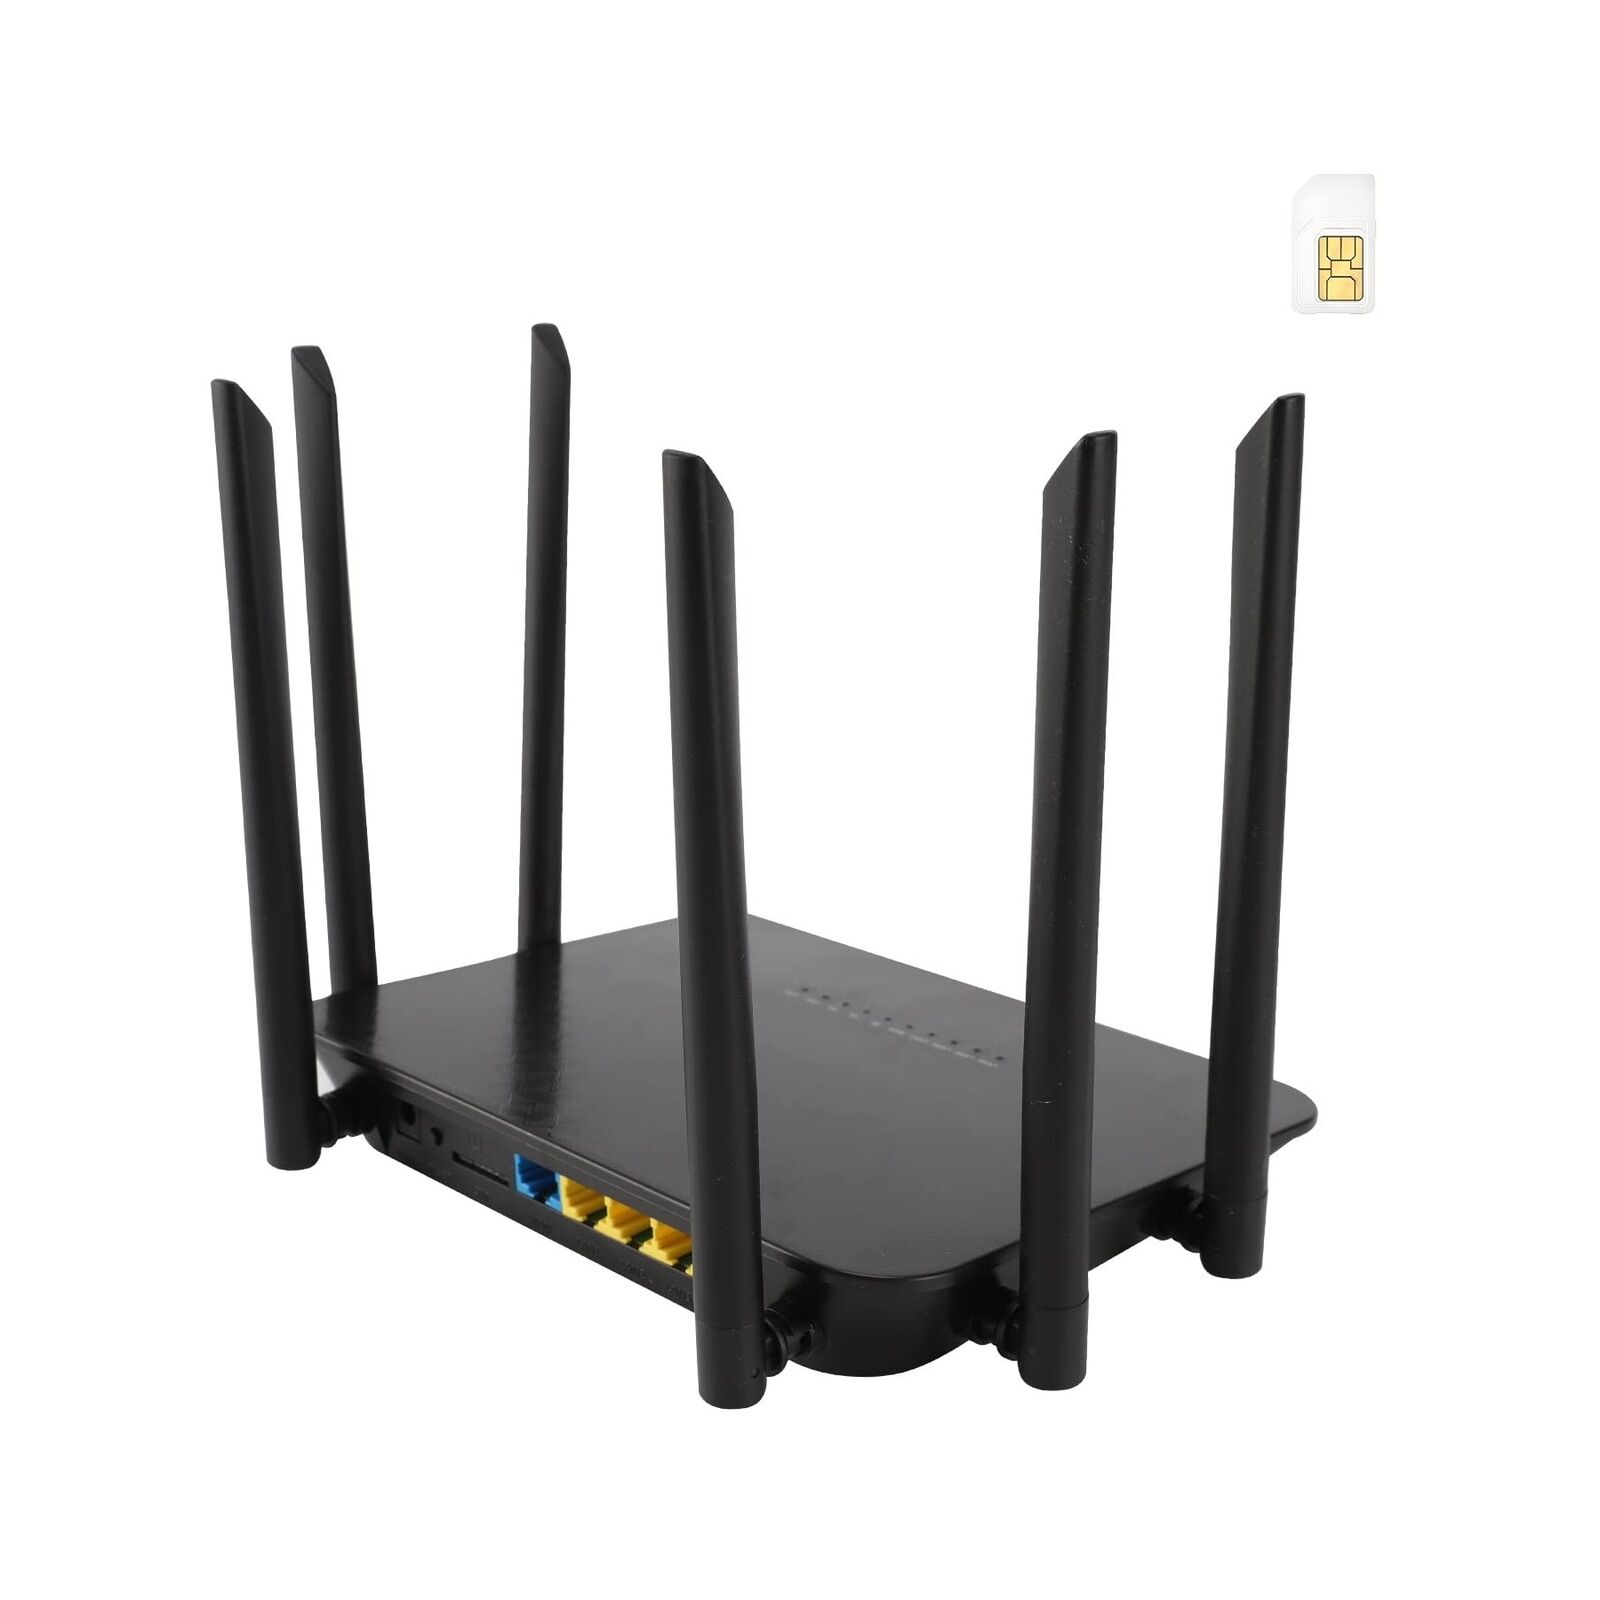 Dionlink Dual Band 4G LTE Router with SIM Card Slot Unlocked Modem, 1200Mbps ...